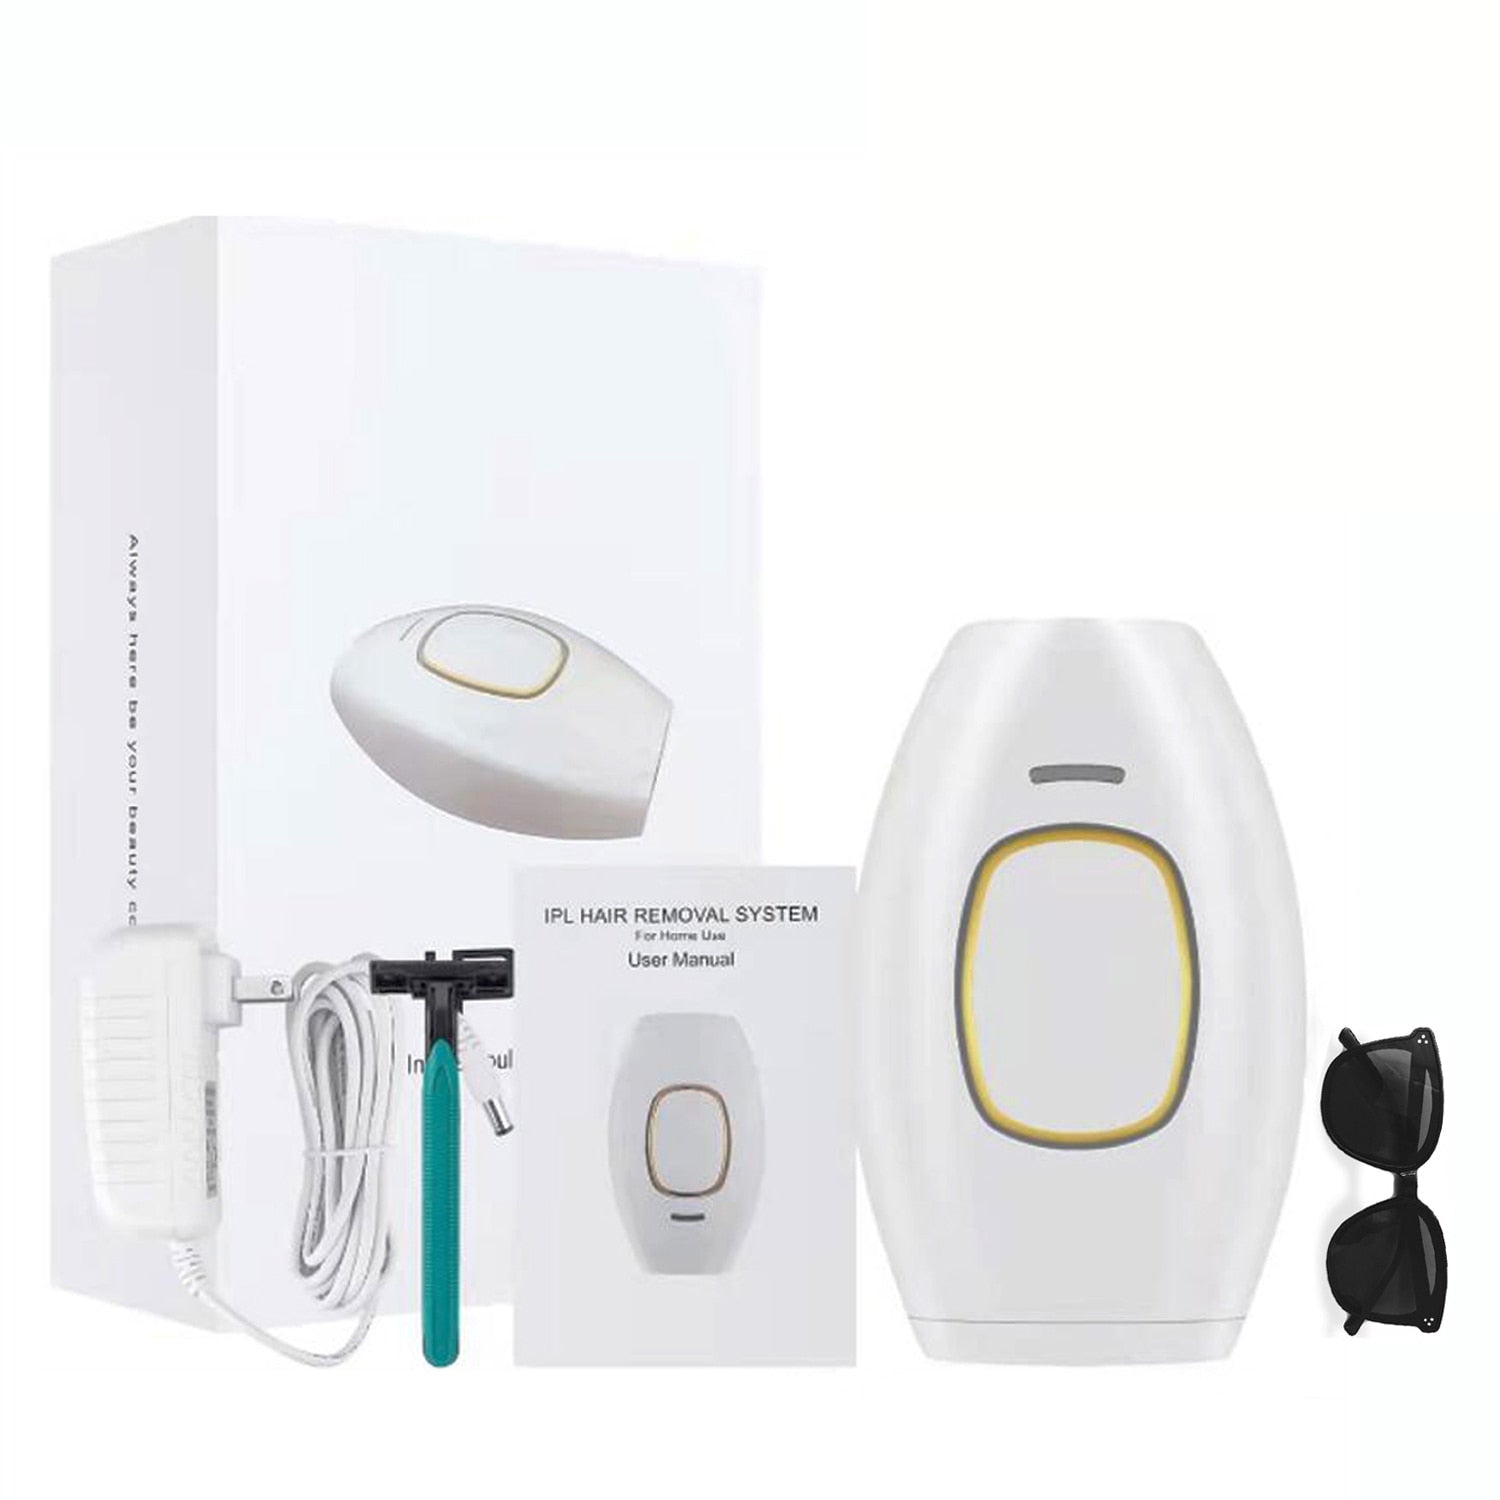 DIY Hair Removal by Laser-IPL Epilator - At Home Painless Hair Removal-Complete Handset by JoyPretty® Joy Pretty Skin